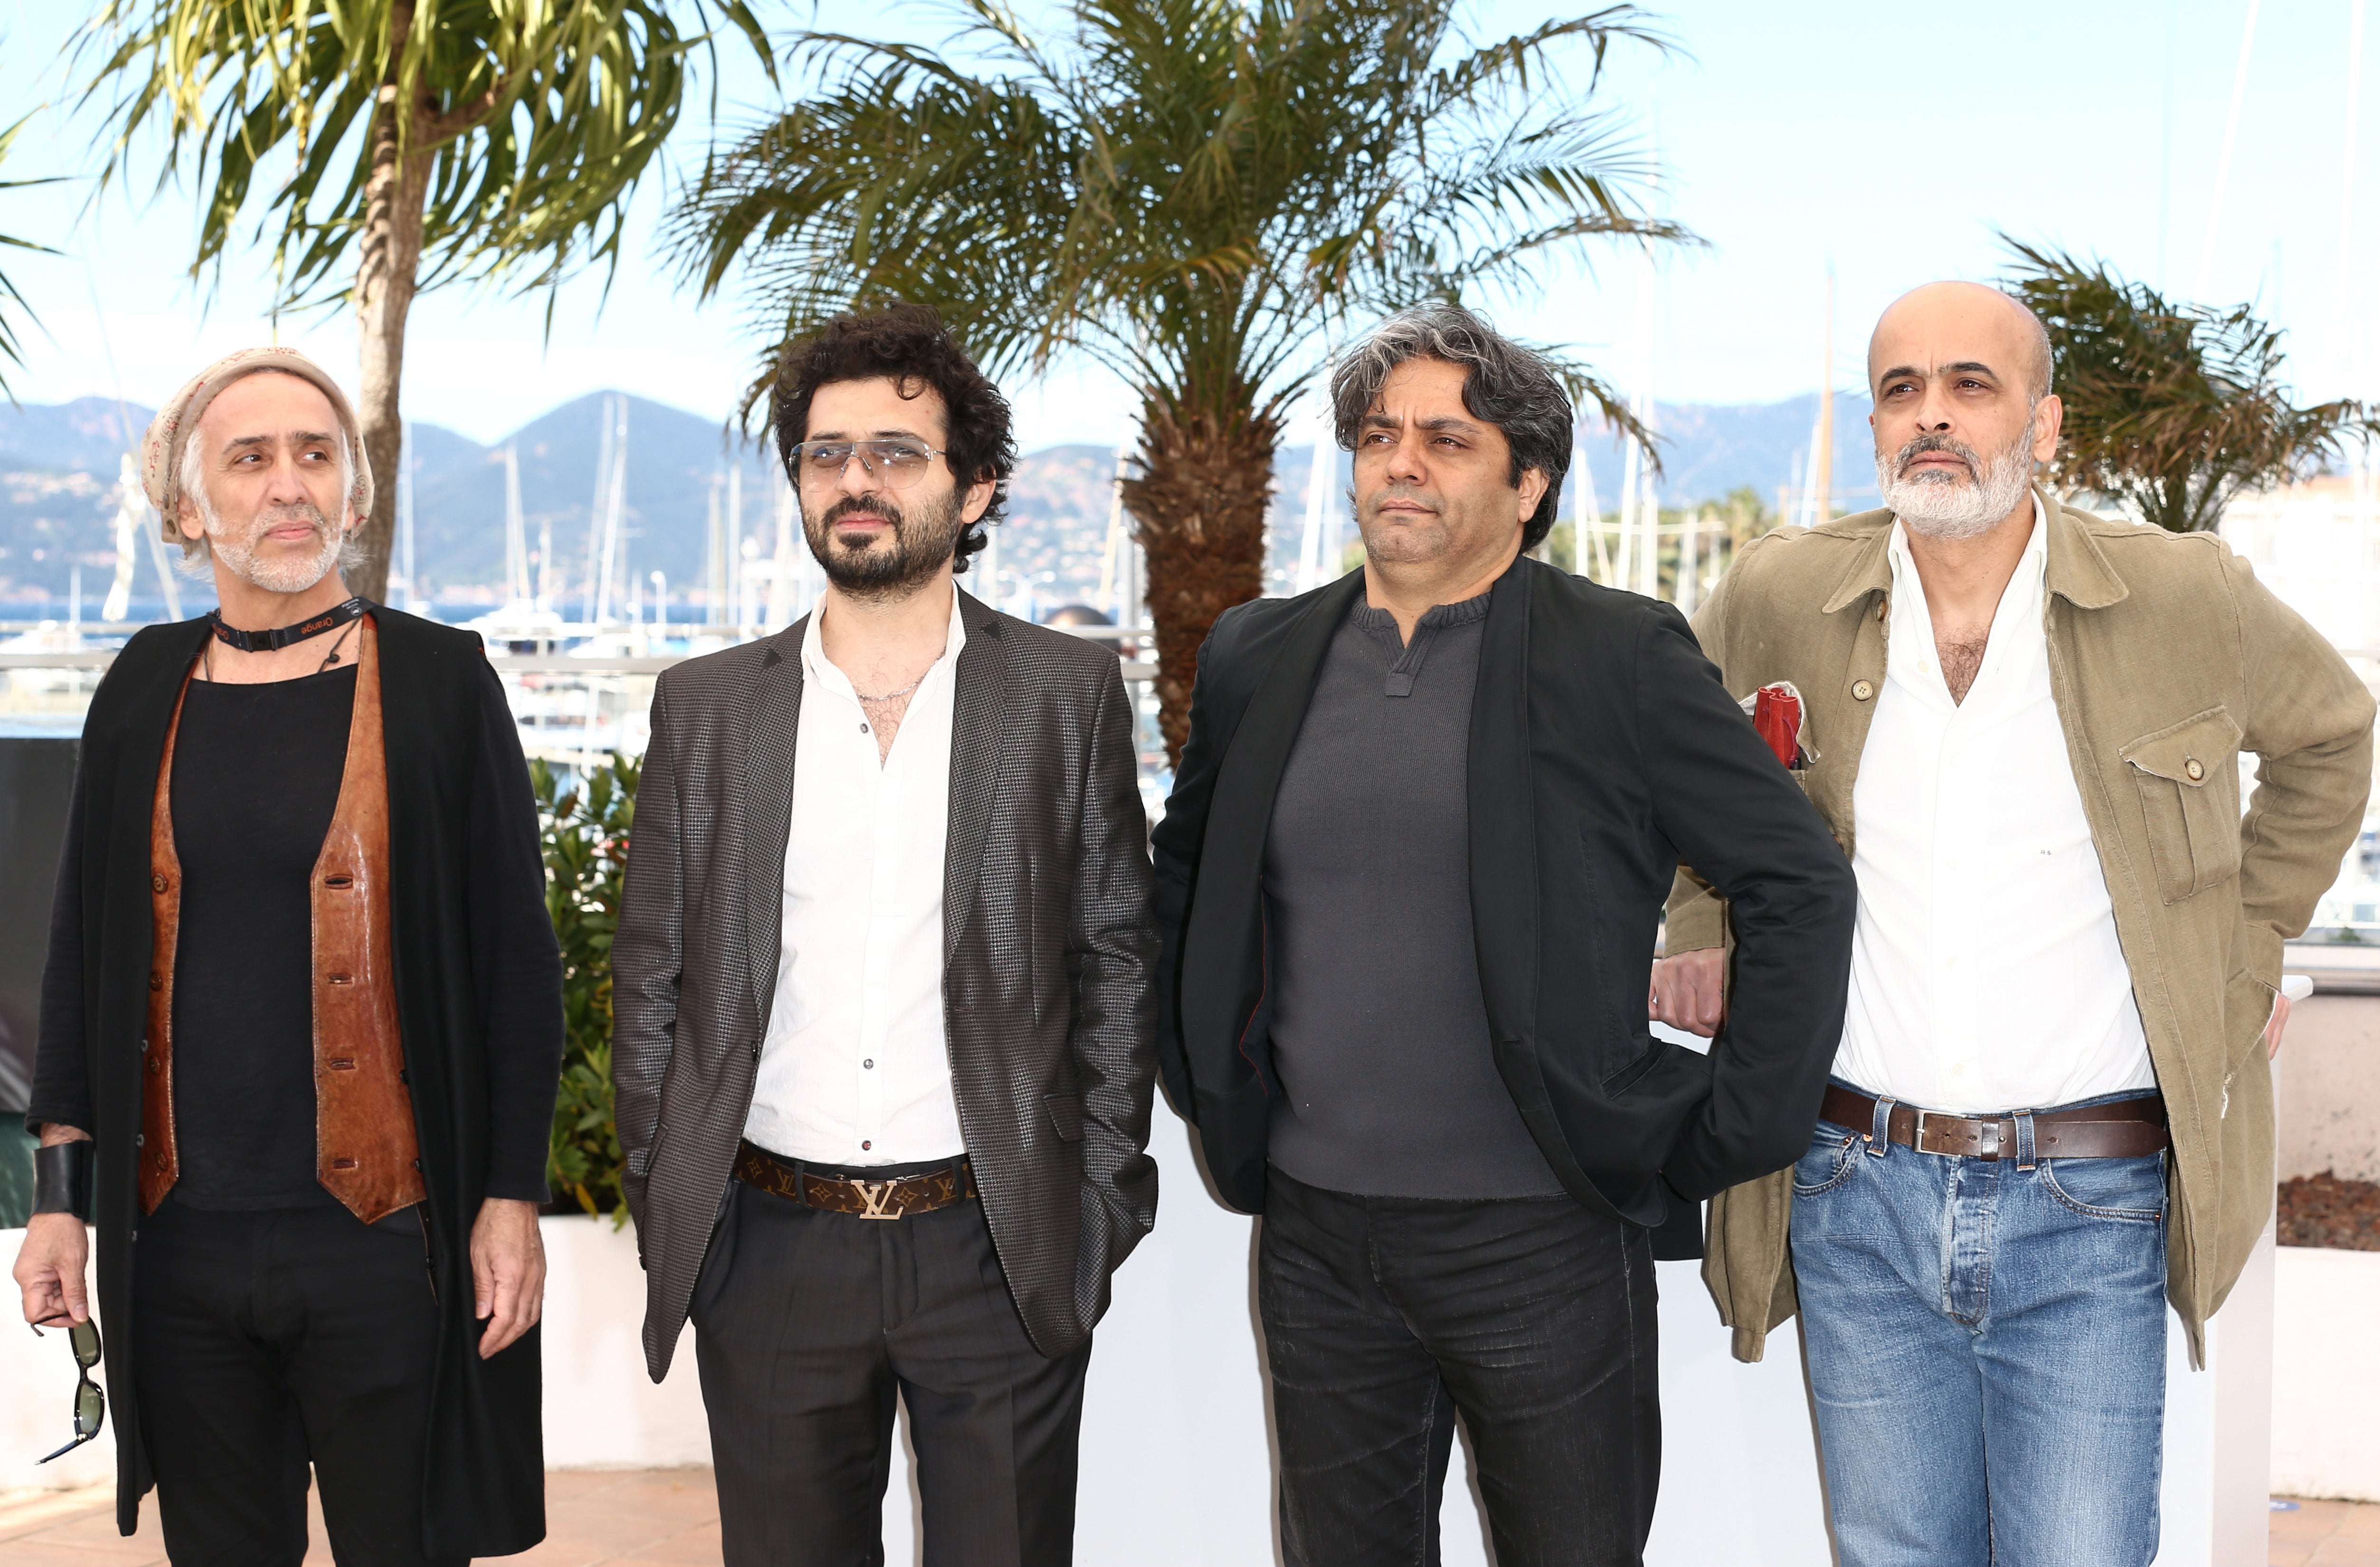 Mohammad Rasoulof (2nd from R) attends the photocall for ‘Dast-Neveshtehaa Nemisoosand’ during The 66th Annual Cannes Film Festival at Palais des Festivals on May 24, 2013 in Cannes